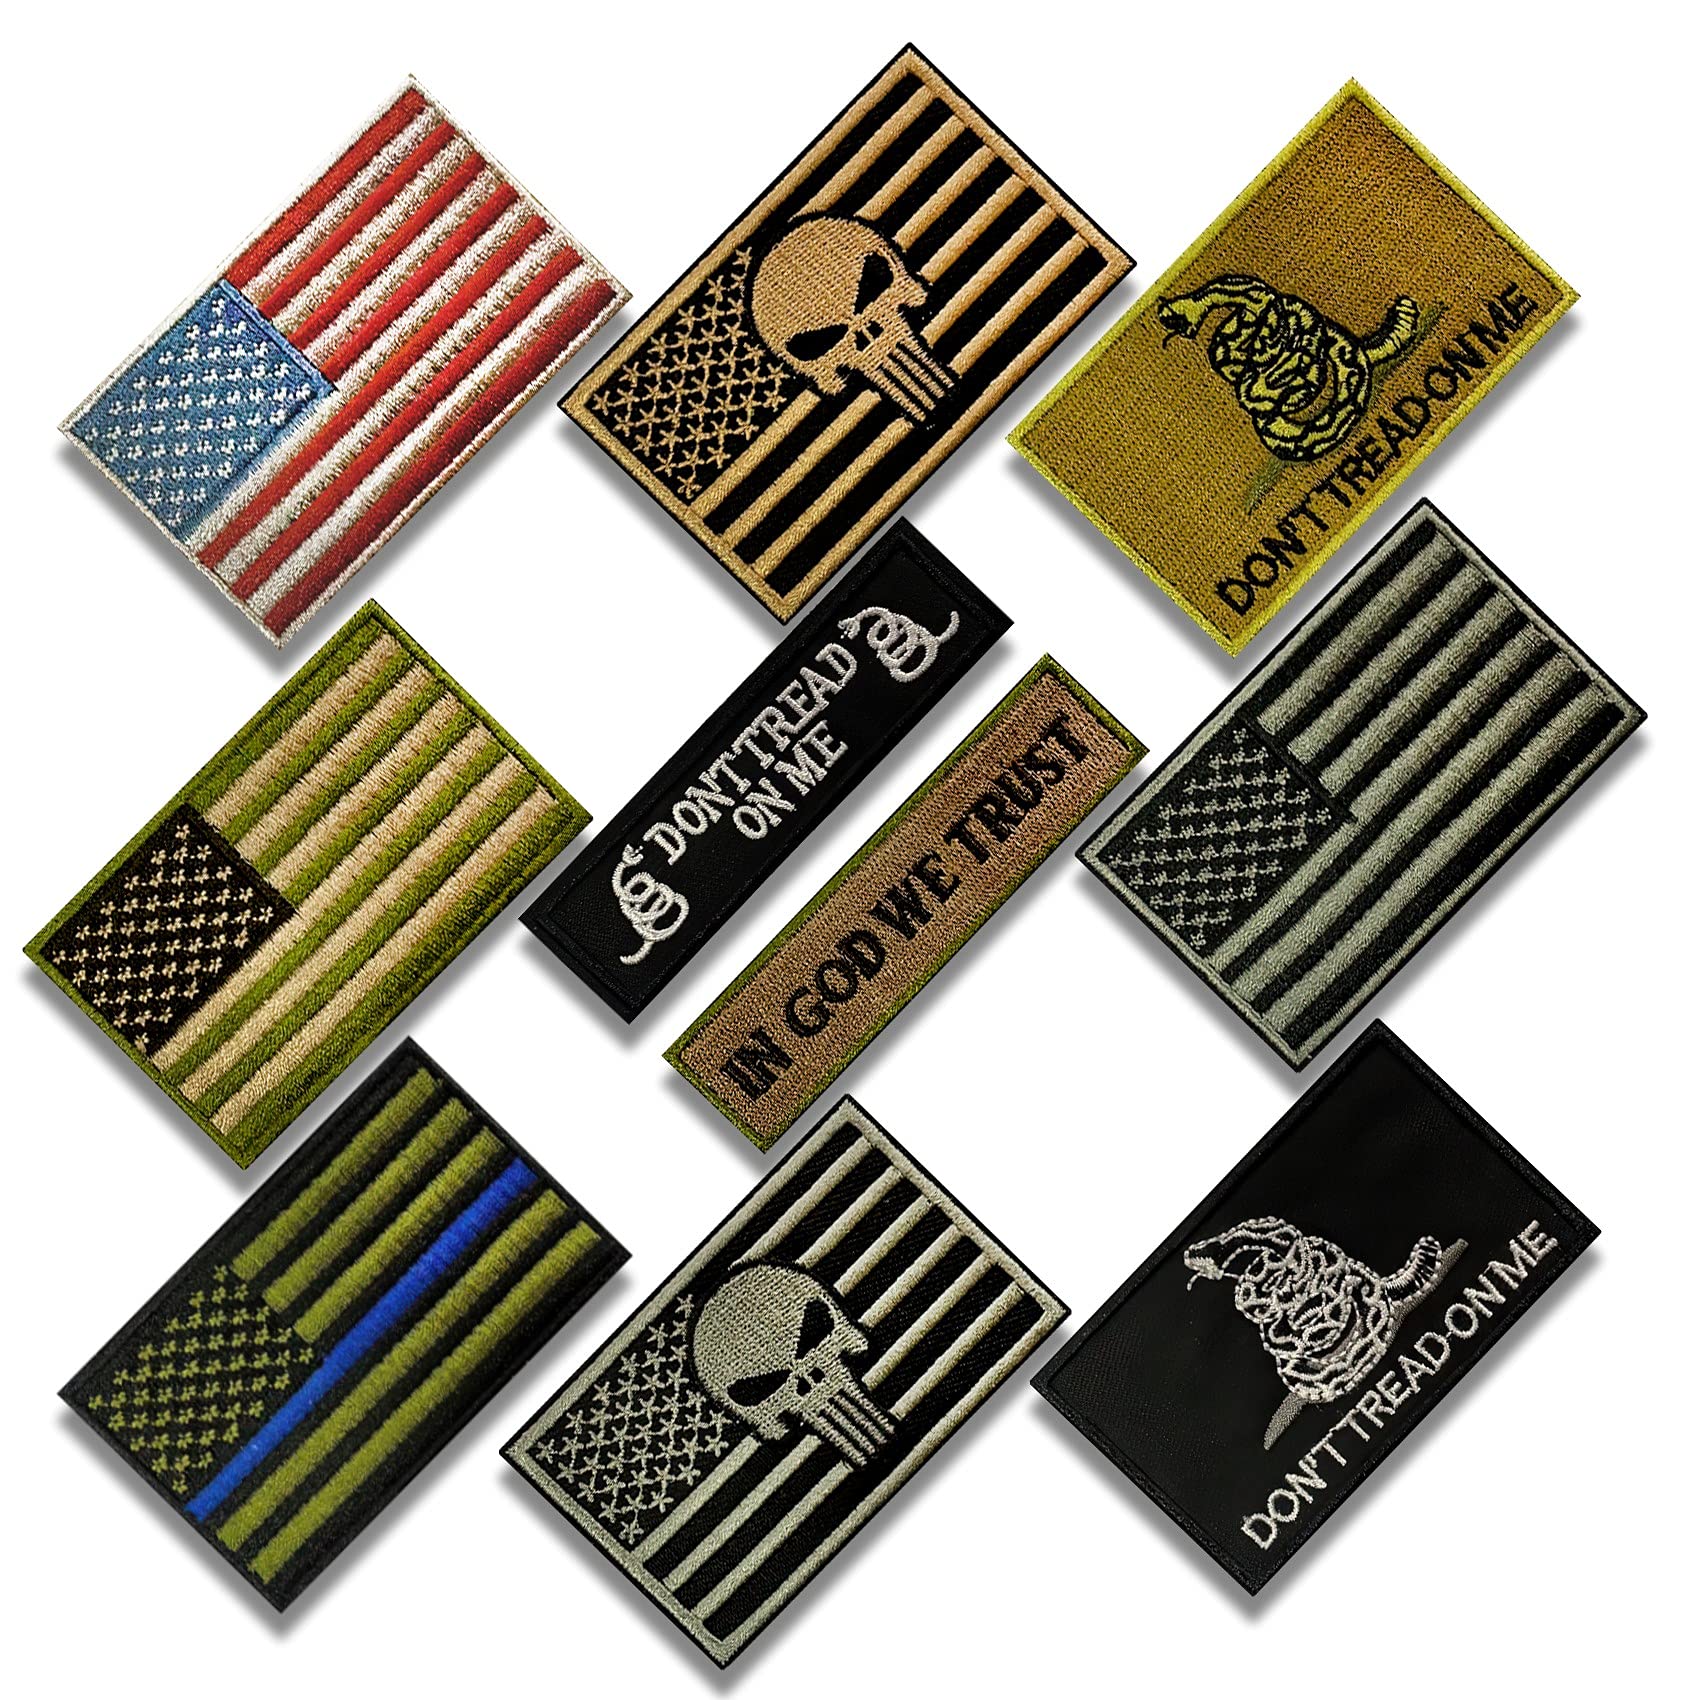 Eybros American Flag Patch, 10 Bundle-Set, Tactical Morale Military Patches  of USA US for Backpacks Hat Army Gears Etc